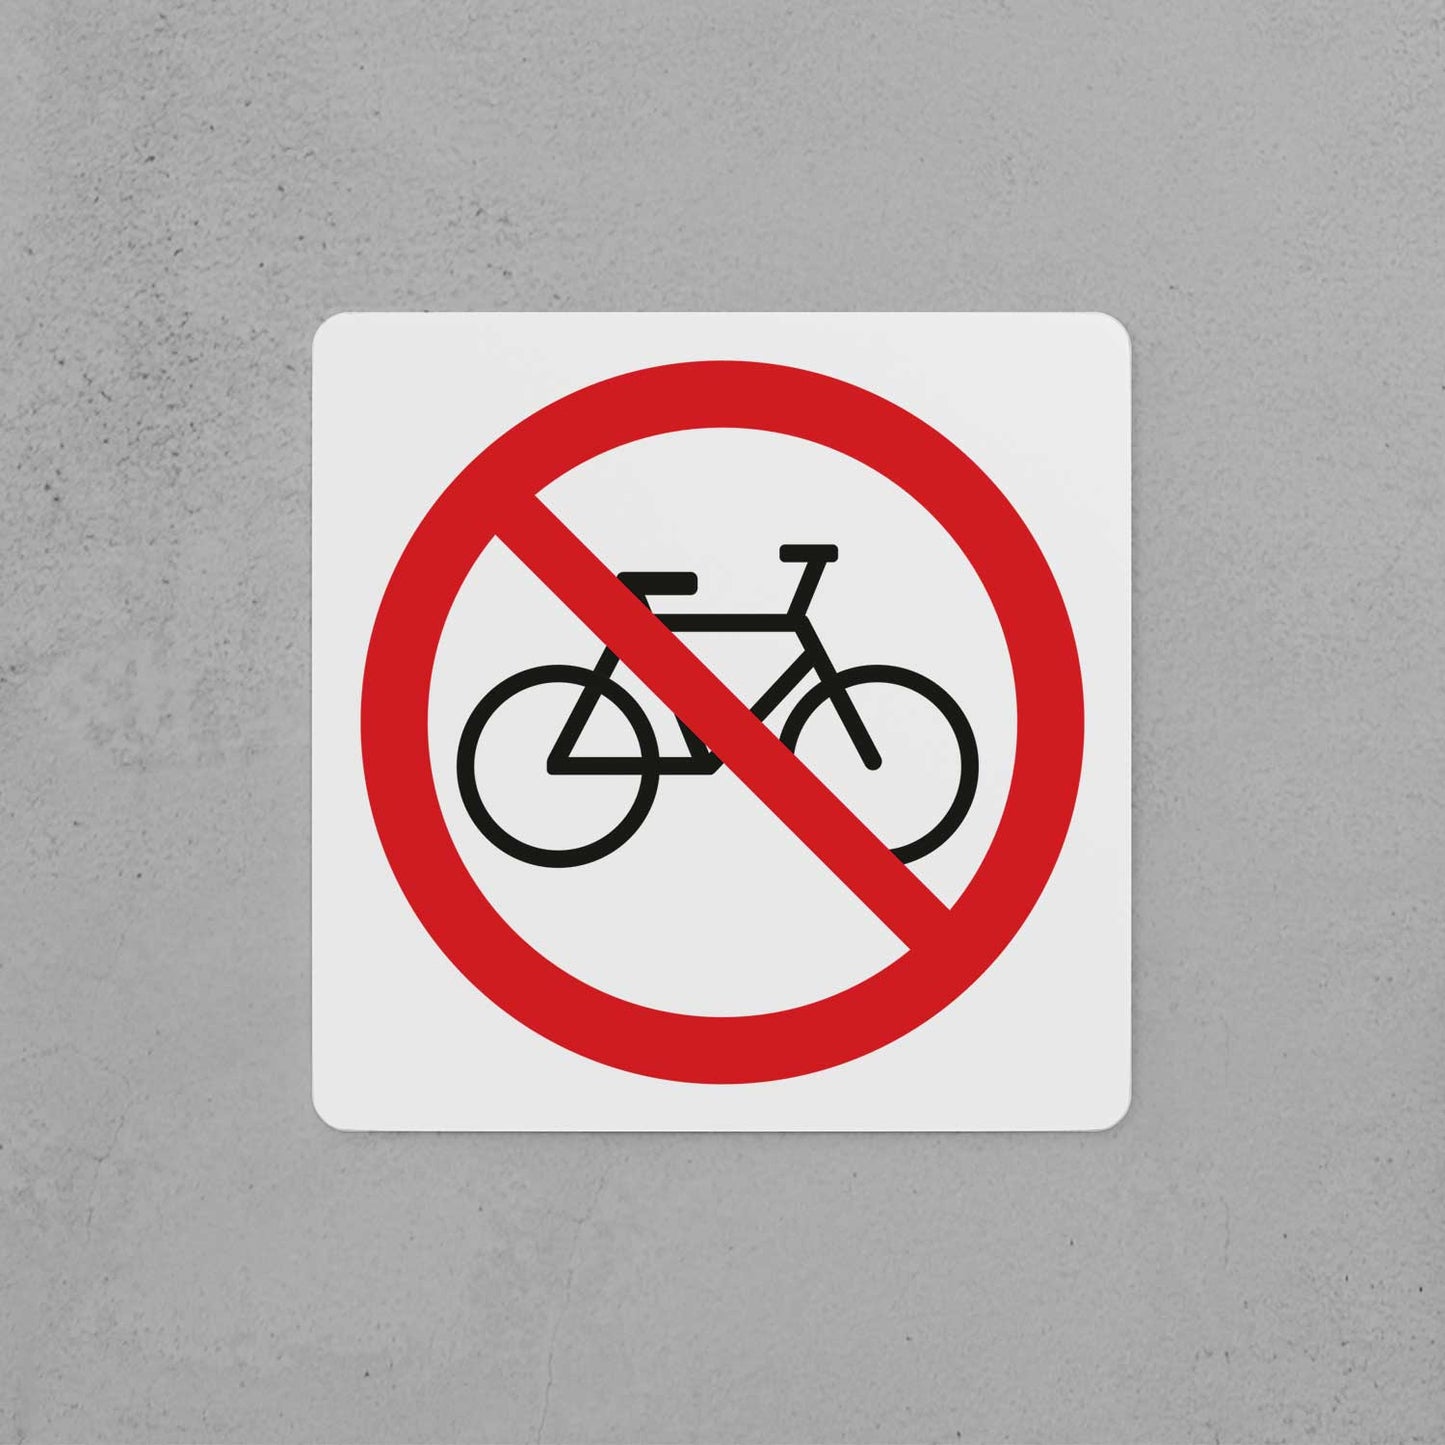 No Cycling Allowed Sign